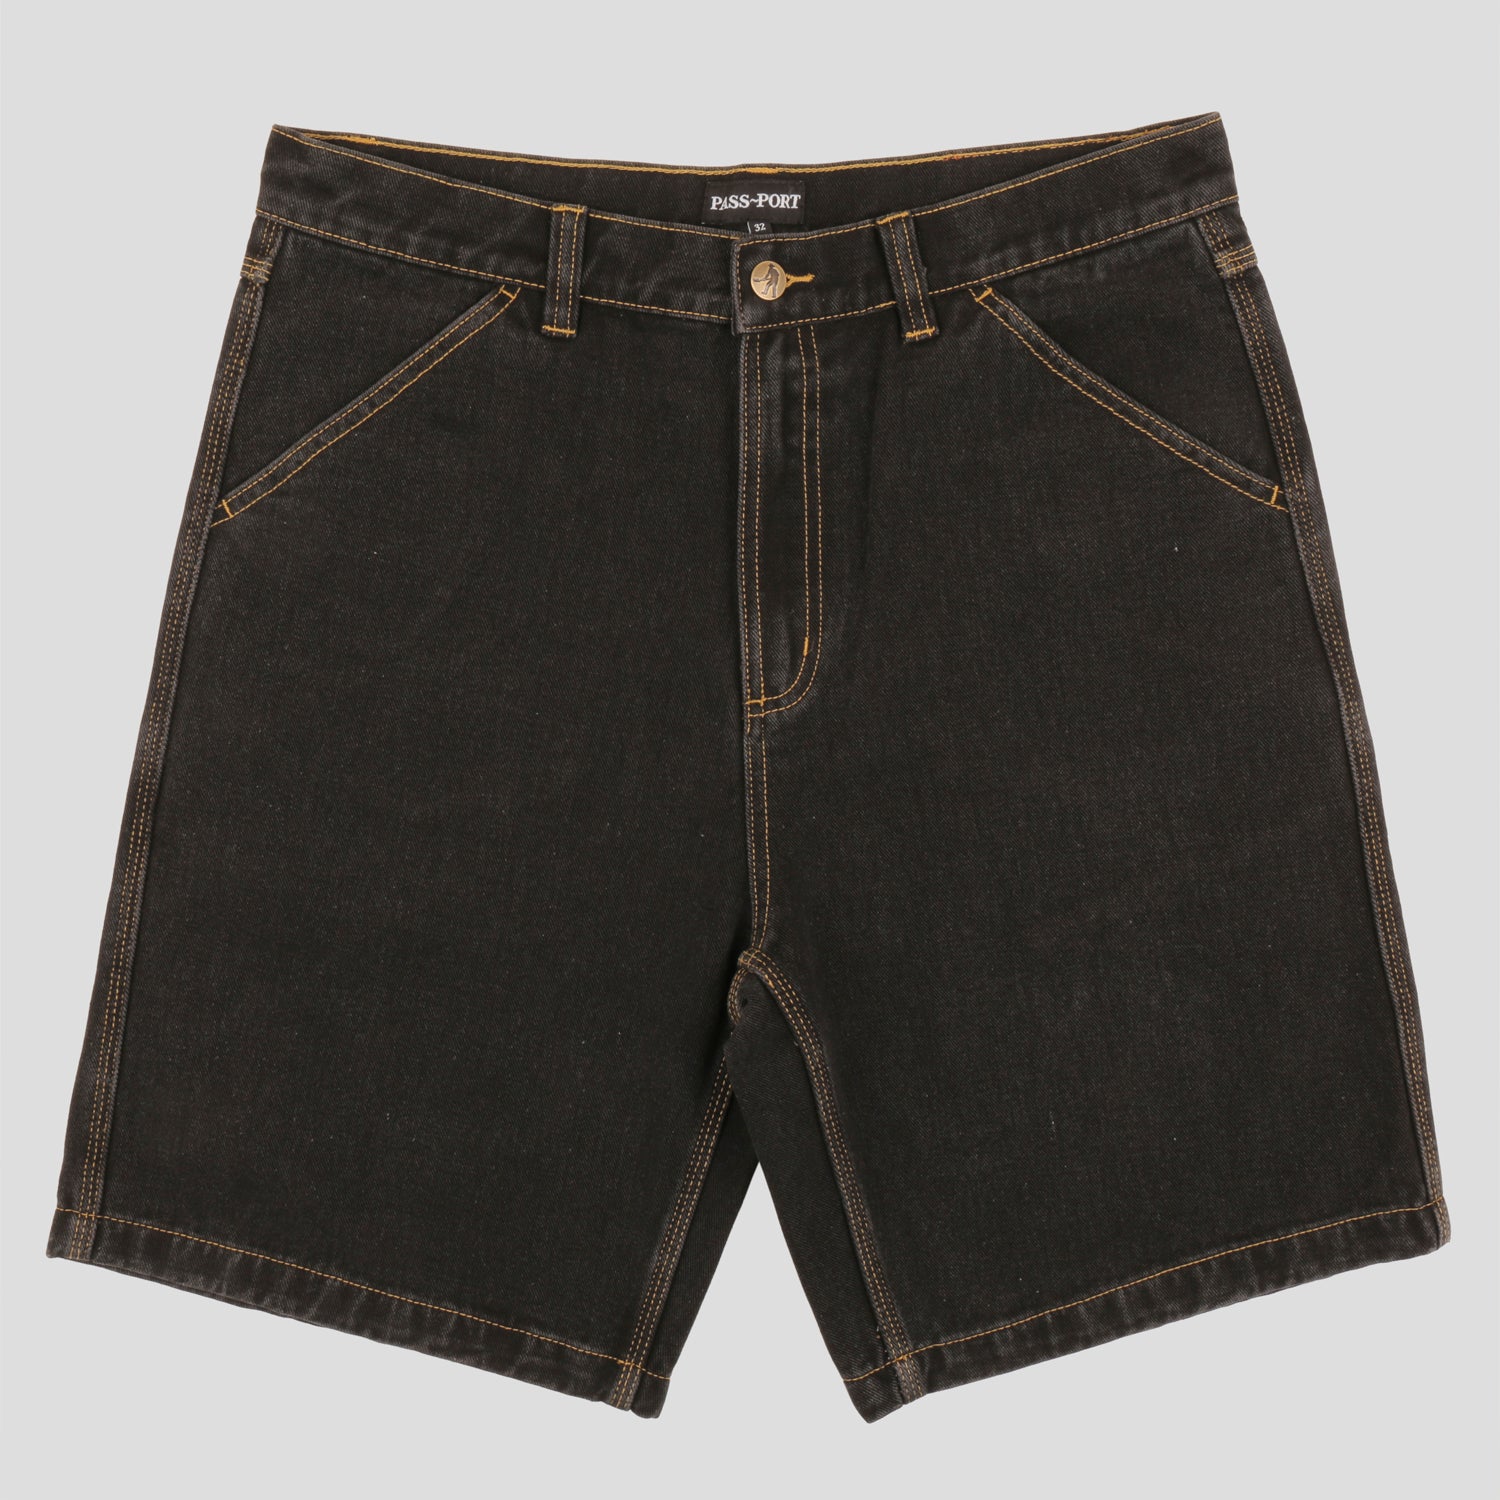 Pass~Port Workers Club Short - Washed Black